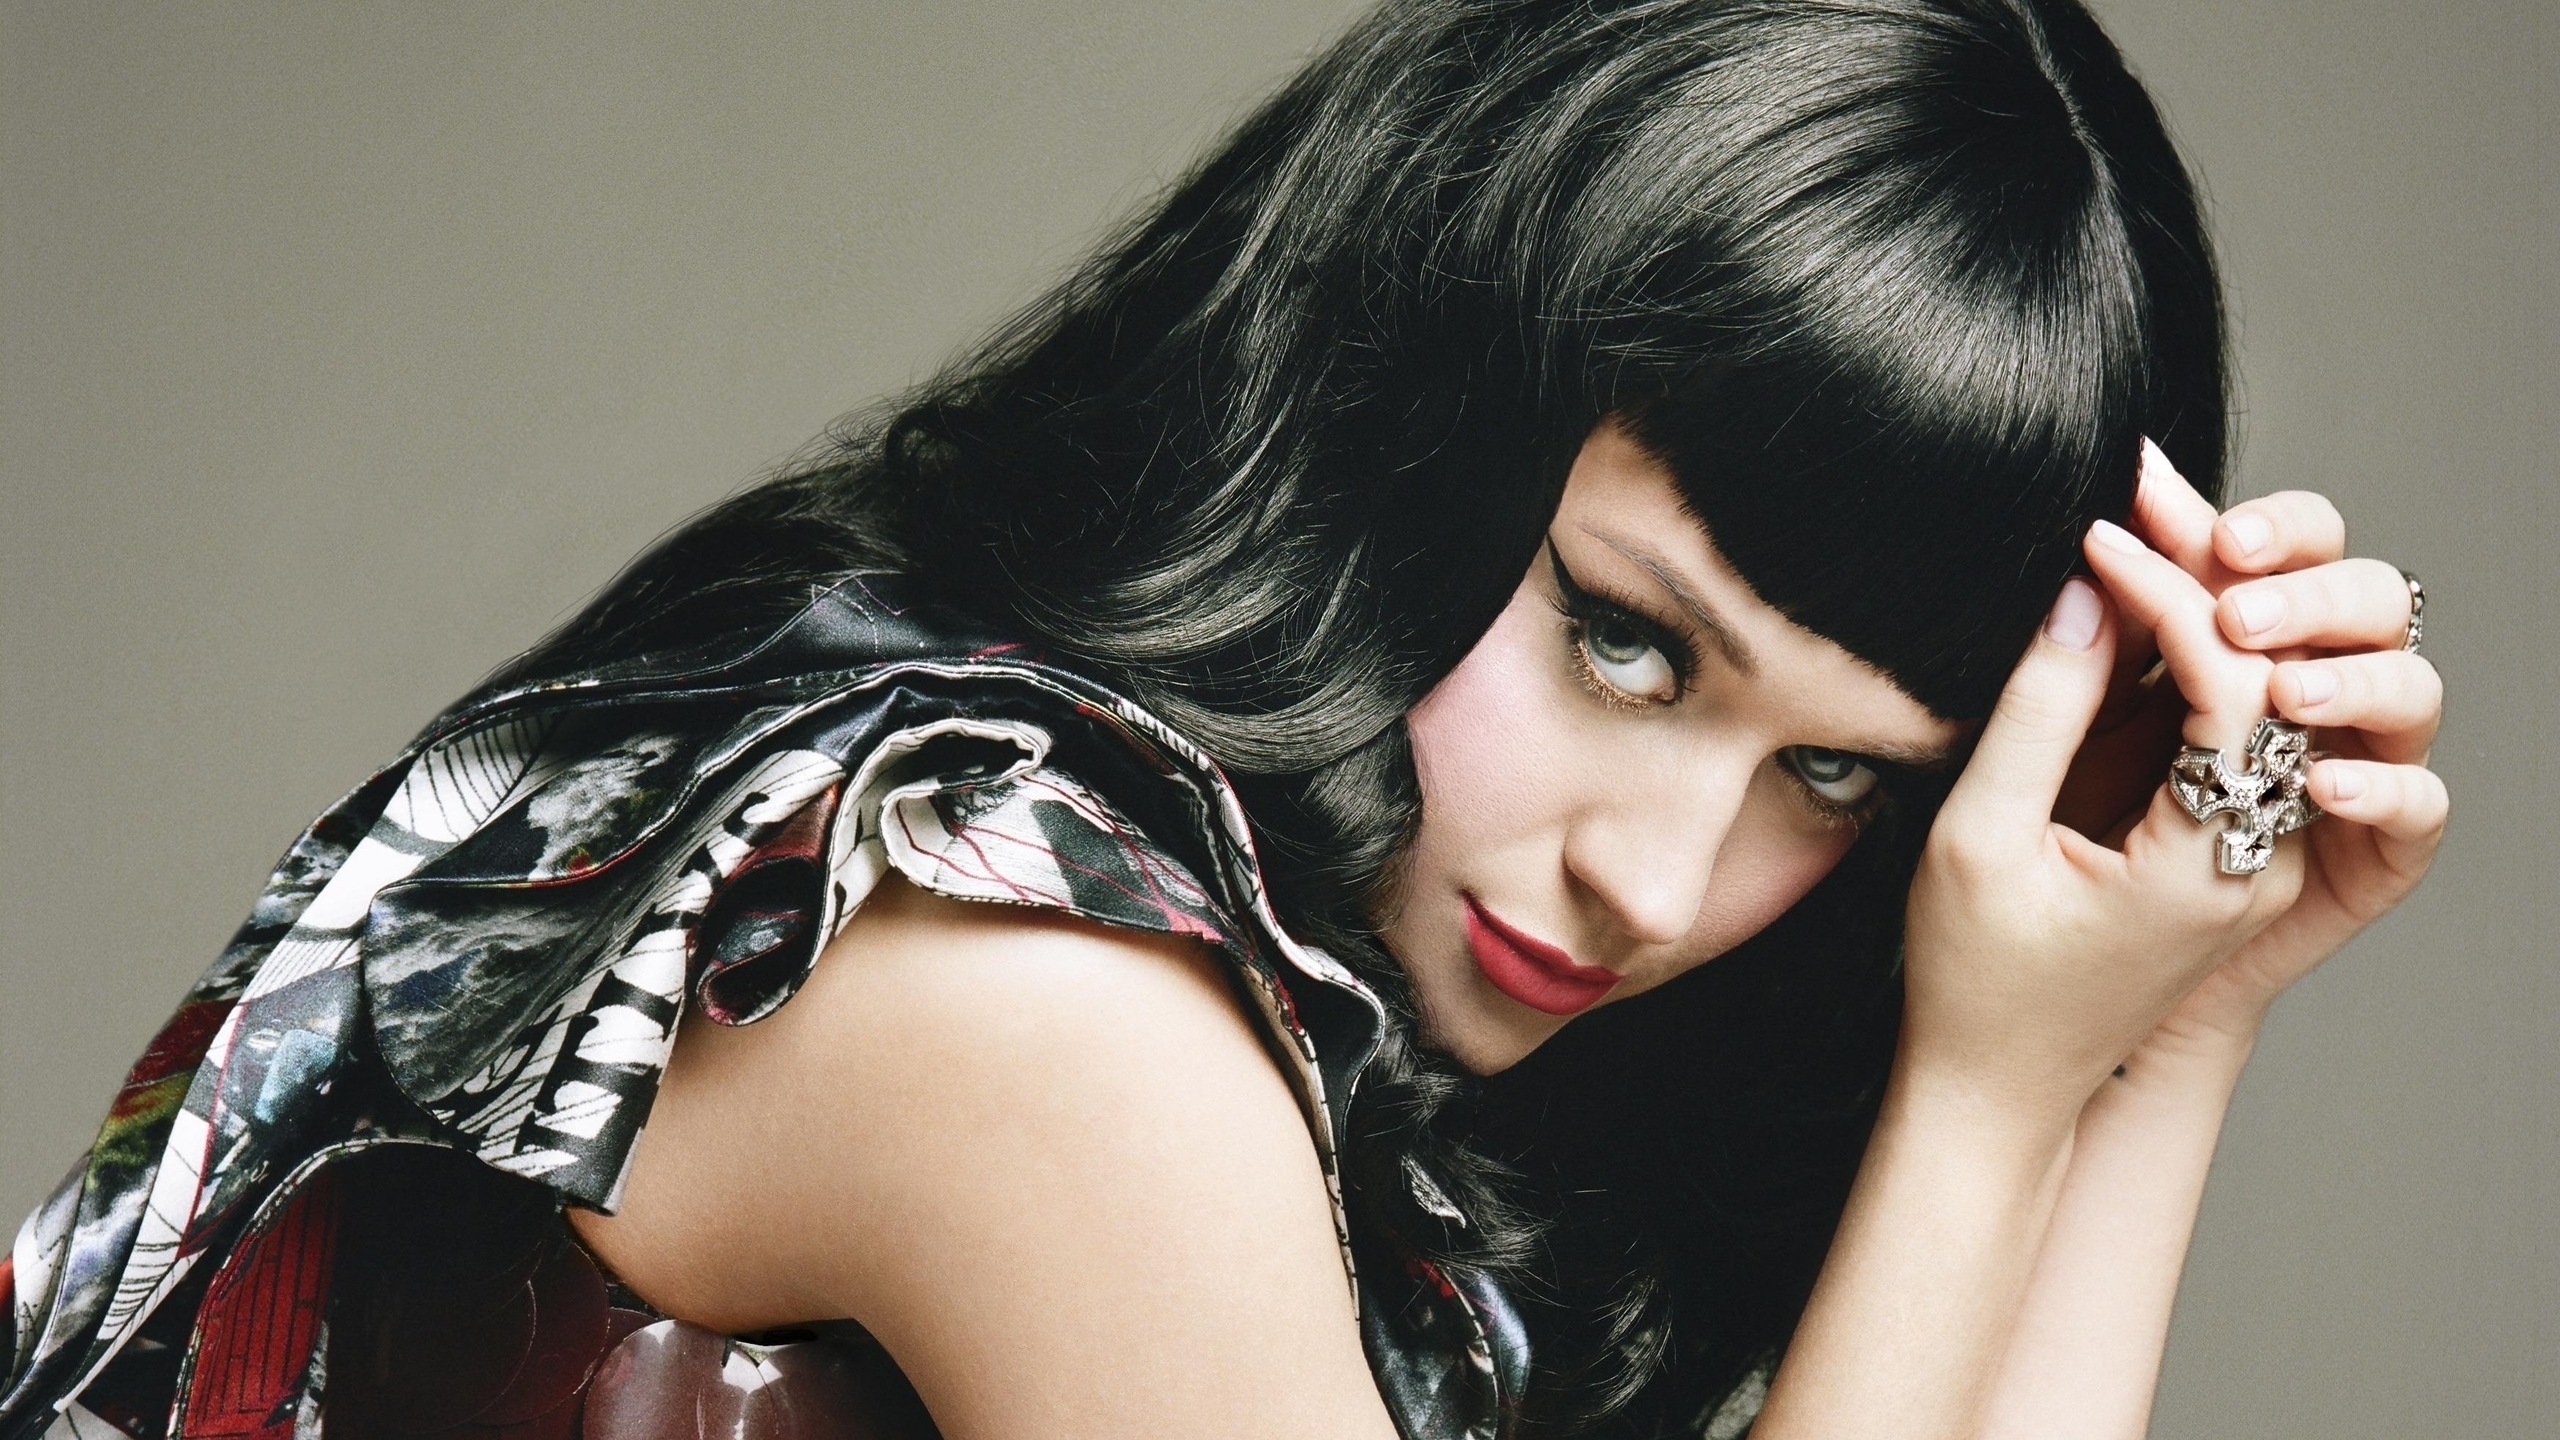 Katy Perry Glance for 2560x1440 HDTV resolution